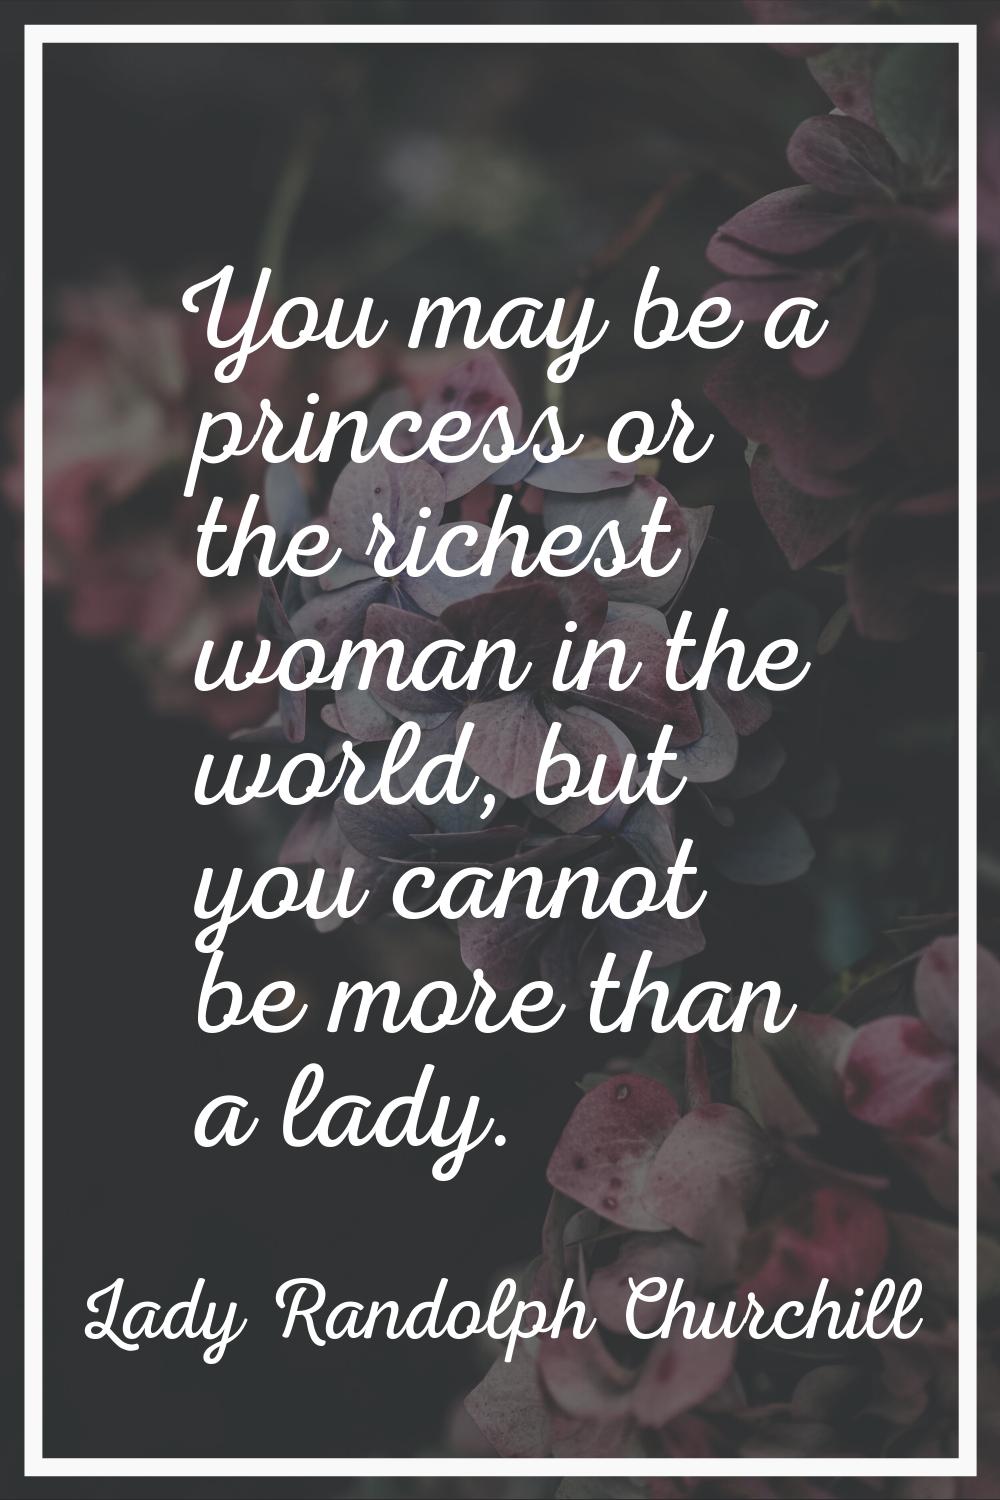 You may be a princess or the richest woman in the world, but you cannot be more than a lady.